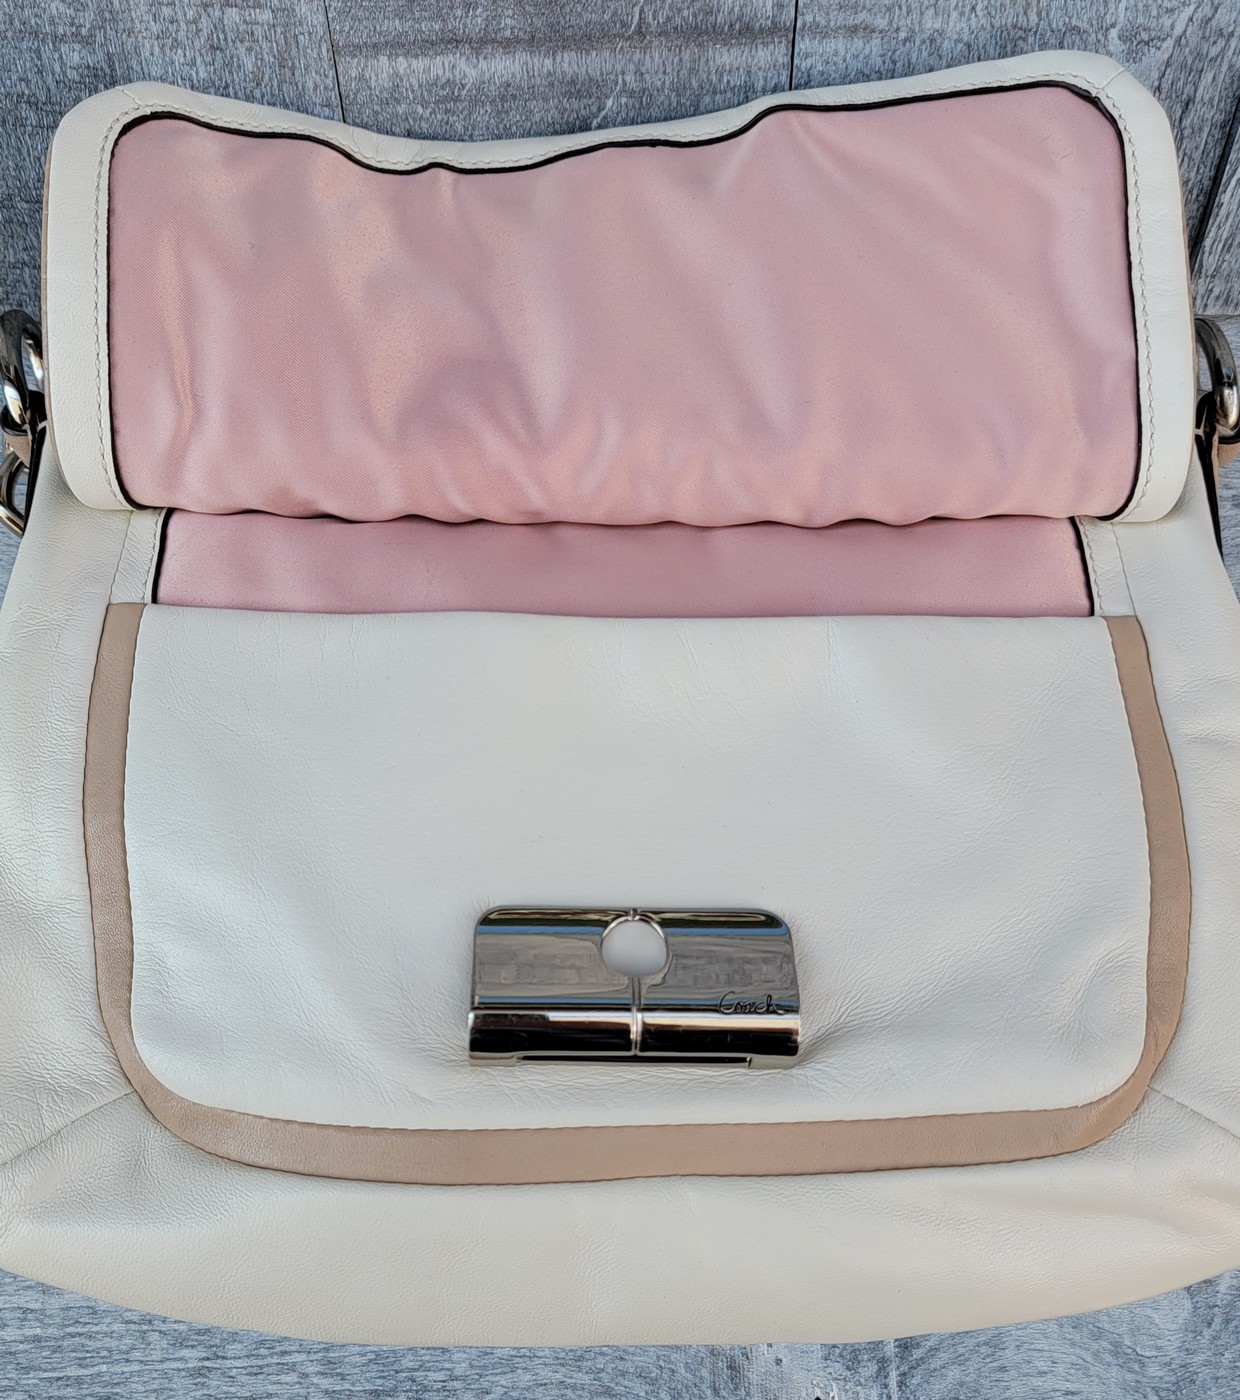 Coach Signature Style with Pink Shoulder Bag – The Saved Collection